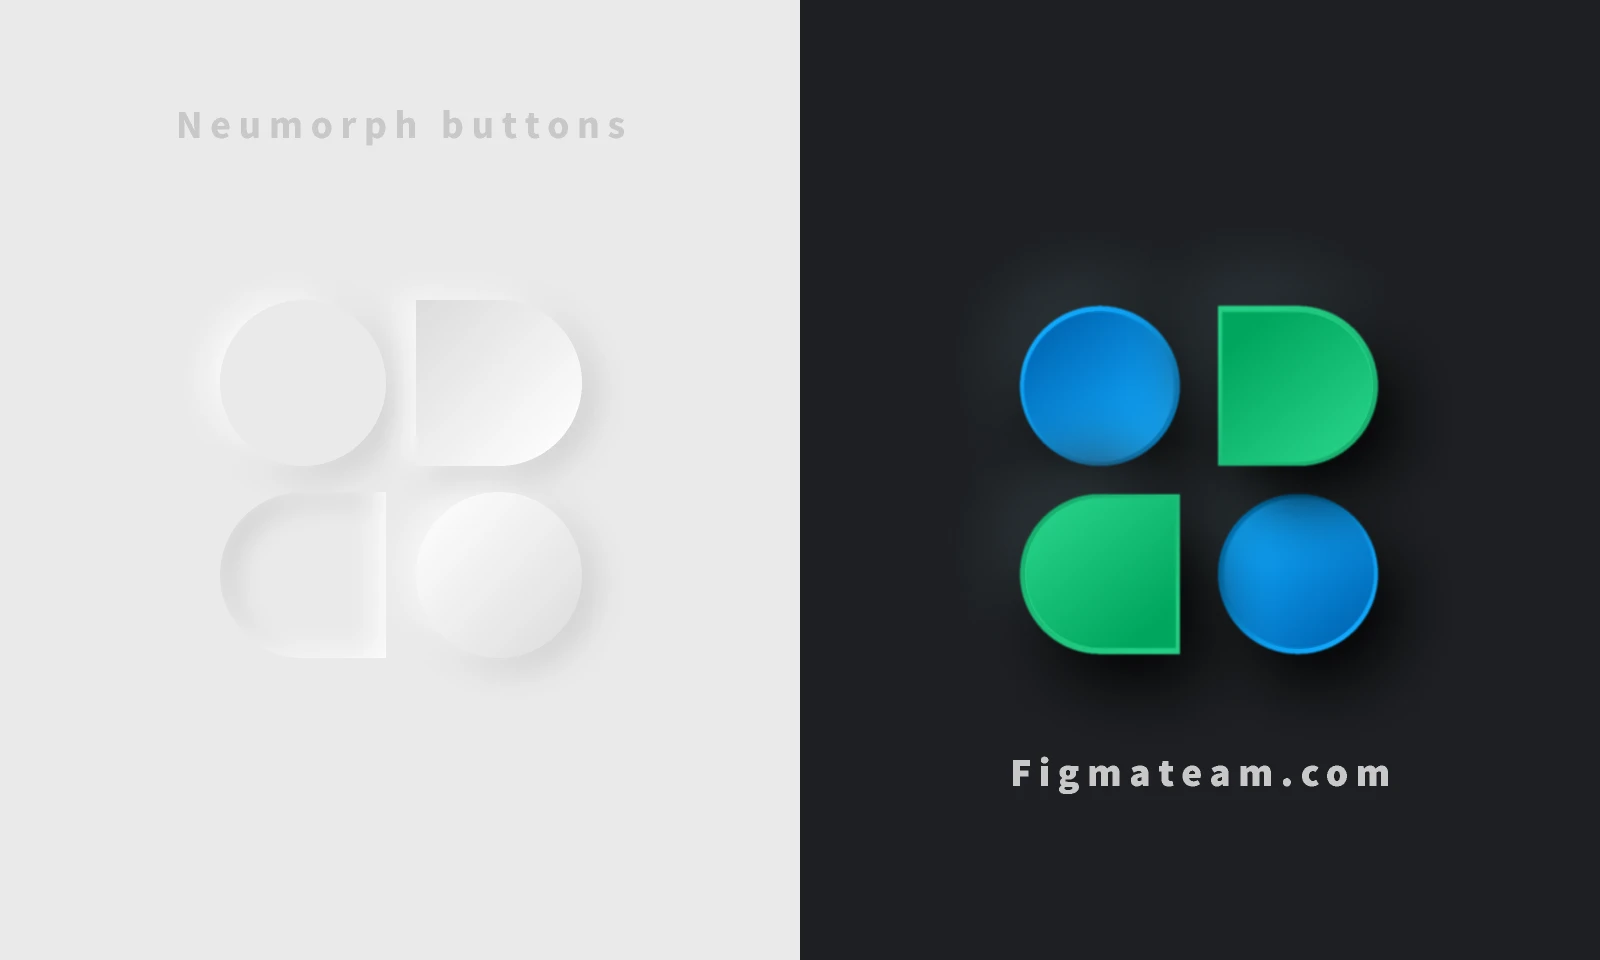 Free Neumorph Buttons FigmaTeam for Figma and Adobe XD